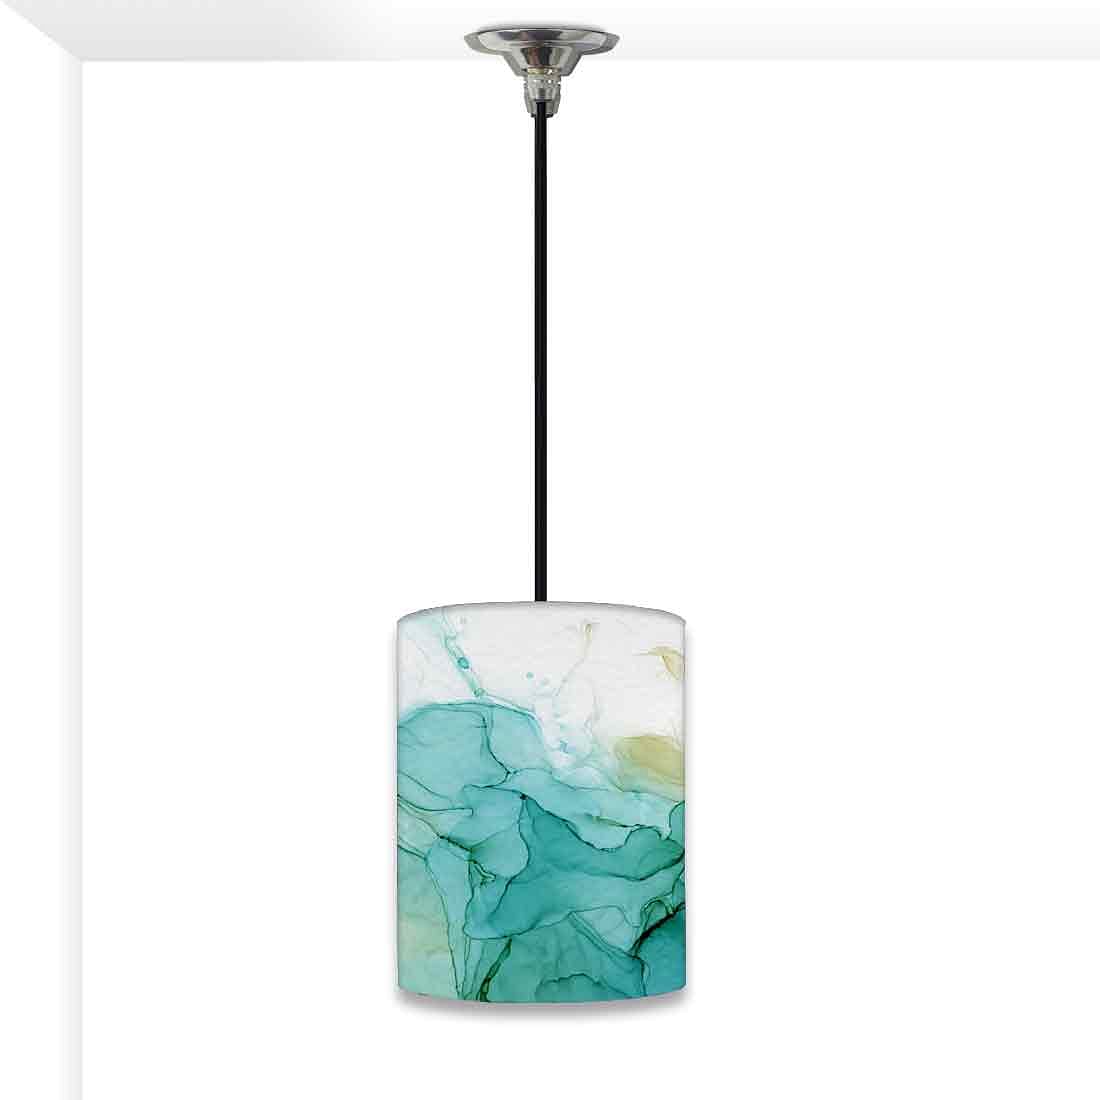 Decorative Ceiling Lamps for Living Room - Watercolor 0195 Nutcase